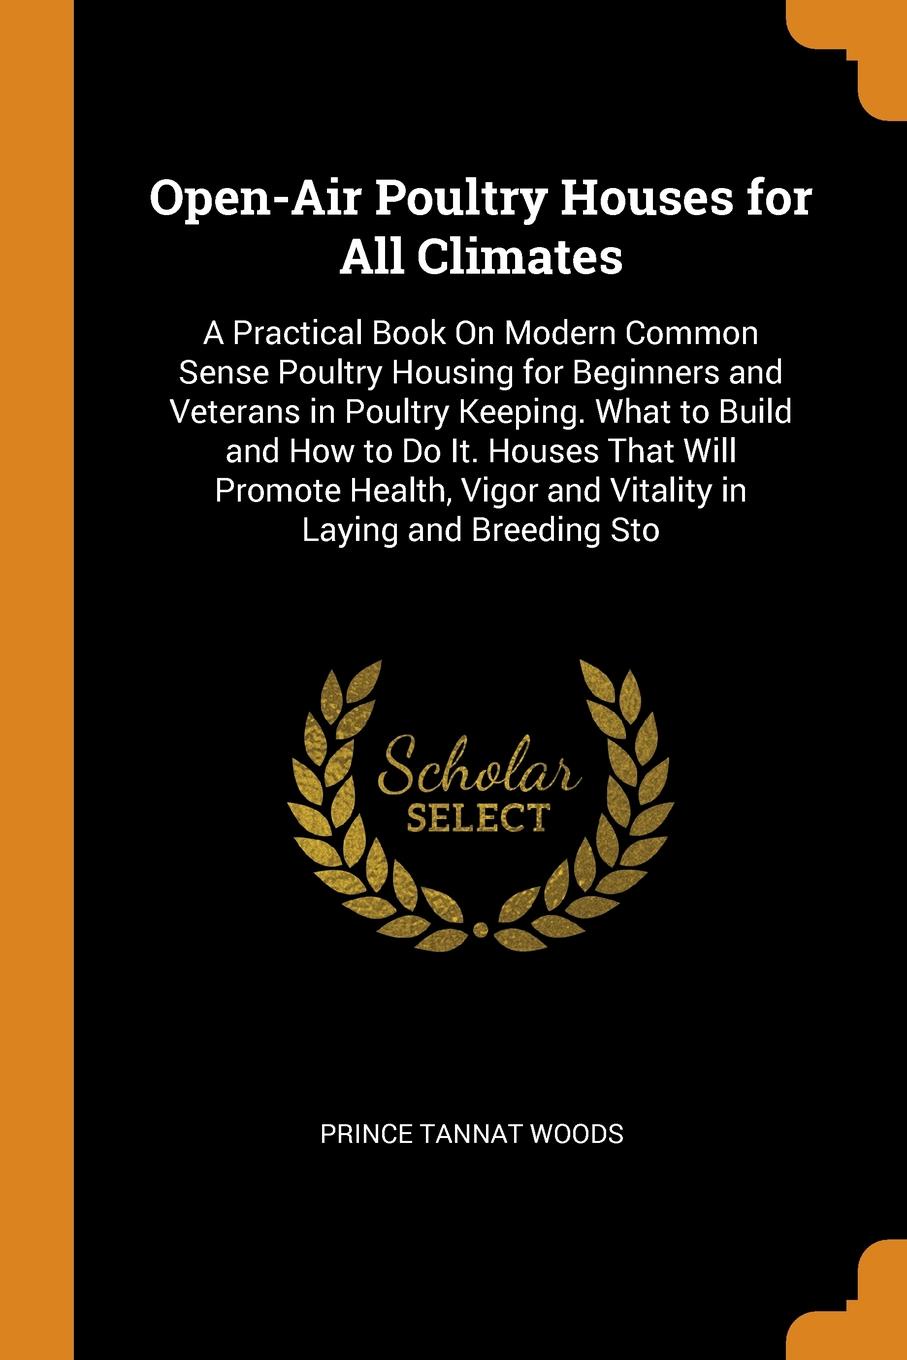 Open-Air Poultry Houses for All Climates. A Practical Book On Modern Common Sense Poultry Housing for Beginners and Veterans in Poultry Keeping. What to Build and How to Do It. Houses That Will Promote Health, Vigor and Vitality in Laying and Bree...